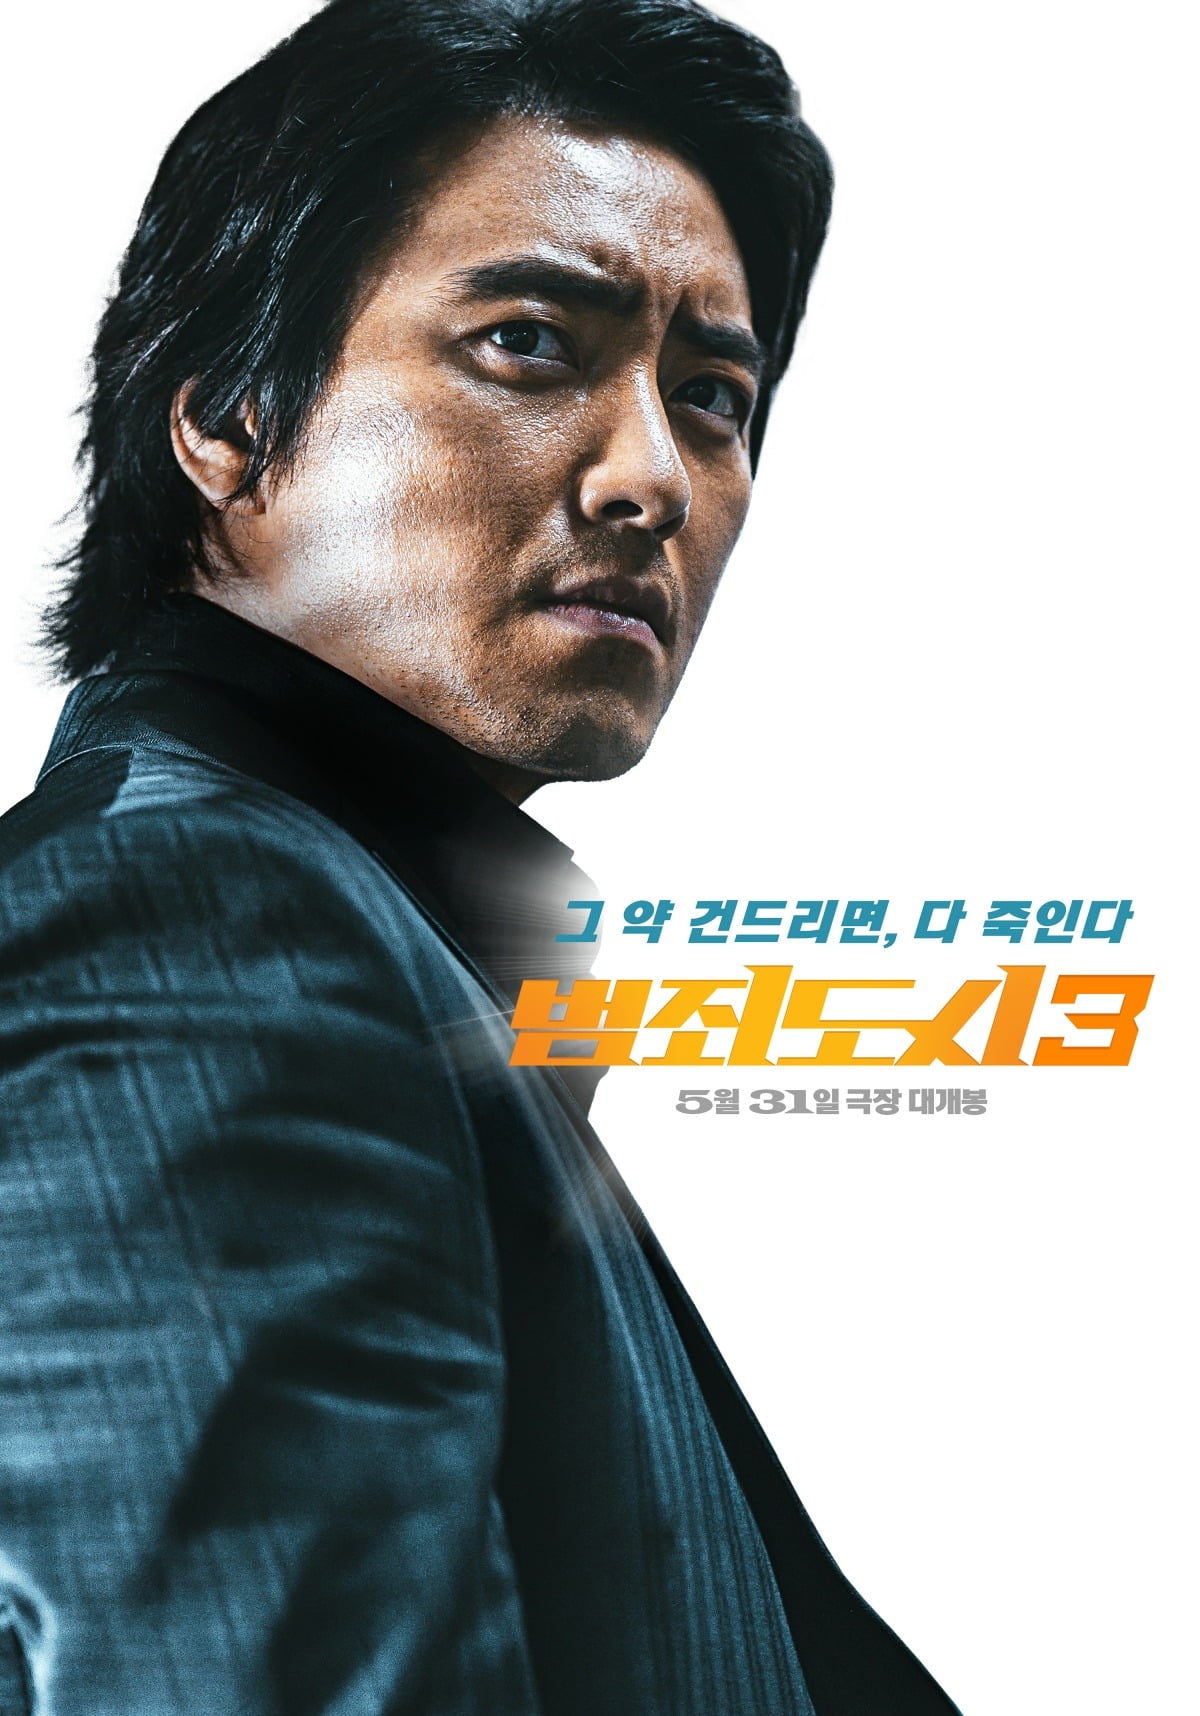 “To fight Ma Dong-seok,” gain a total weight of 45 kg